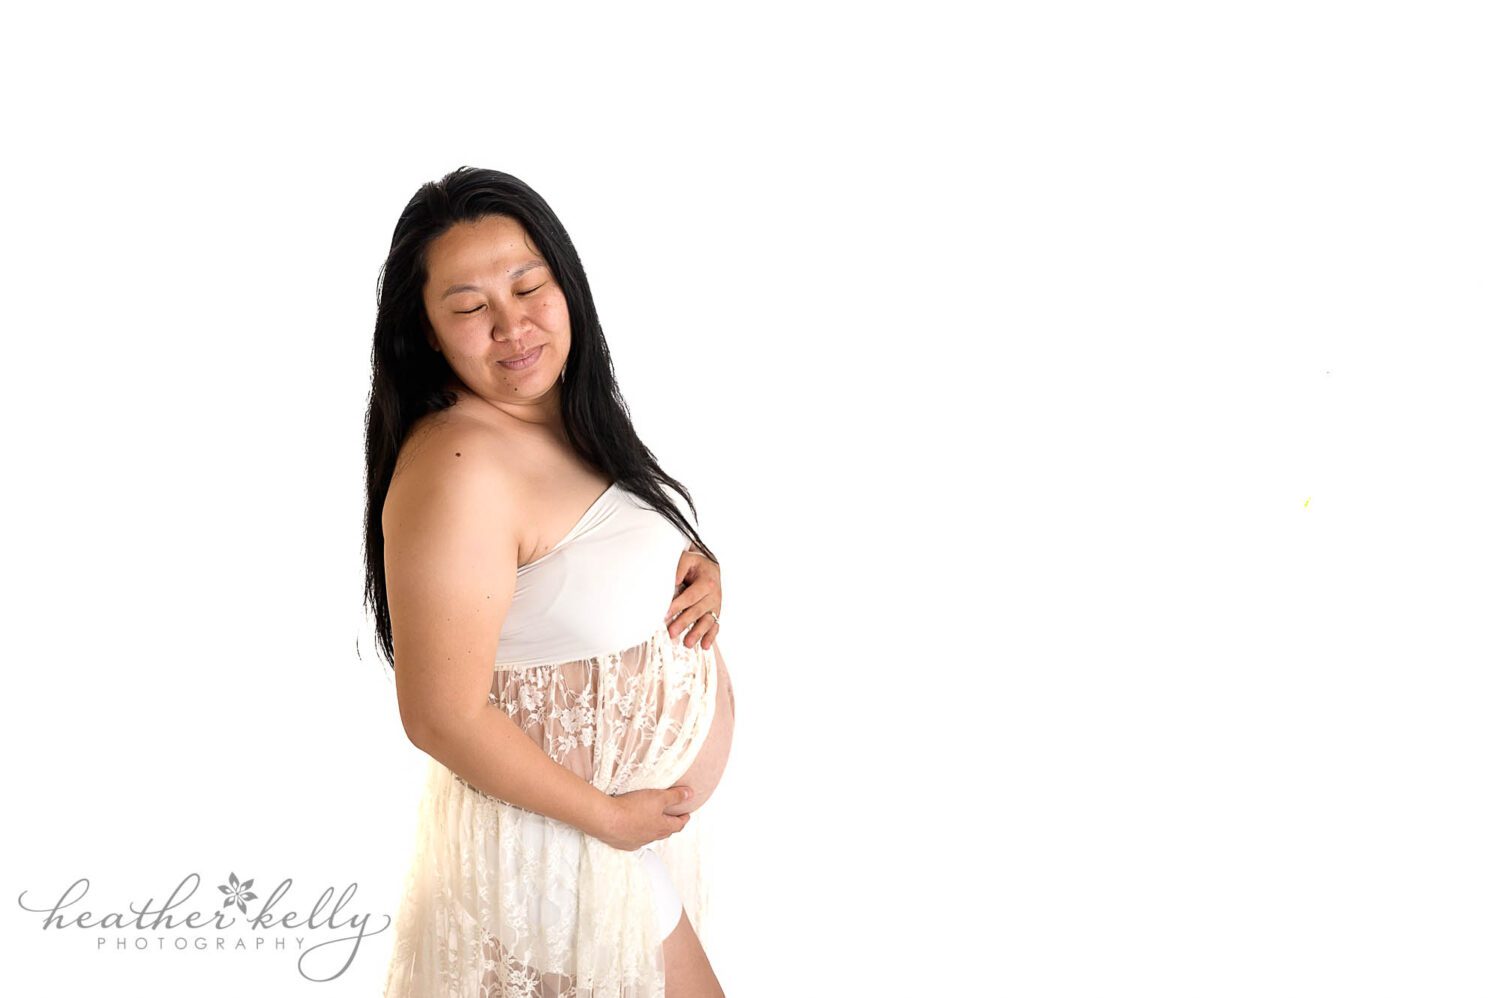 a mom to be wearing a white lace maternity gown during her maternity photography session. There is a high key white background. Danbury maternity photographer